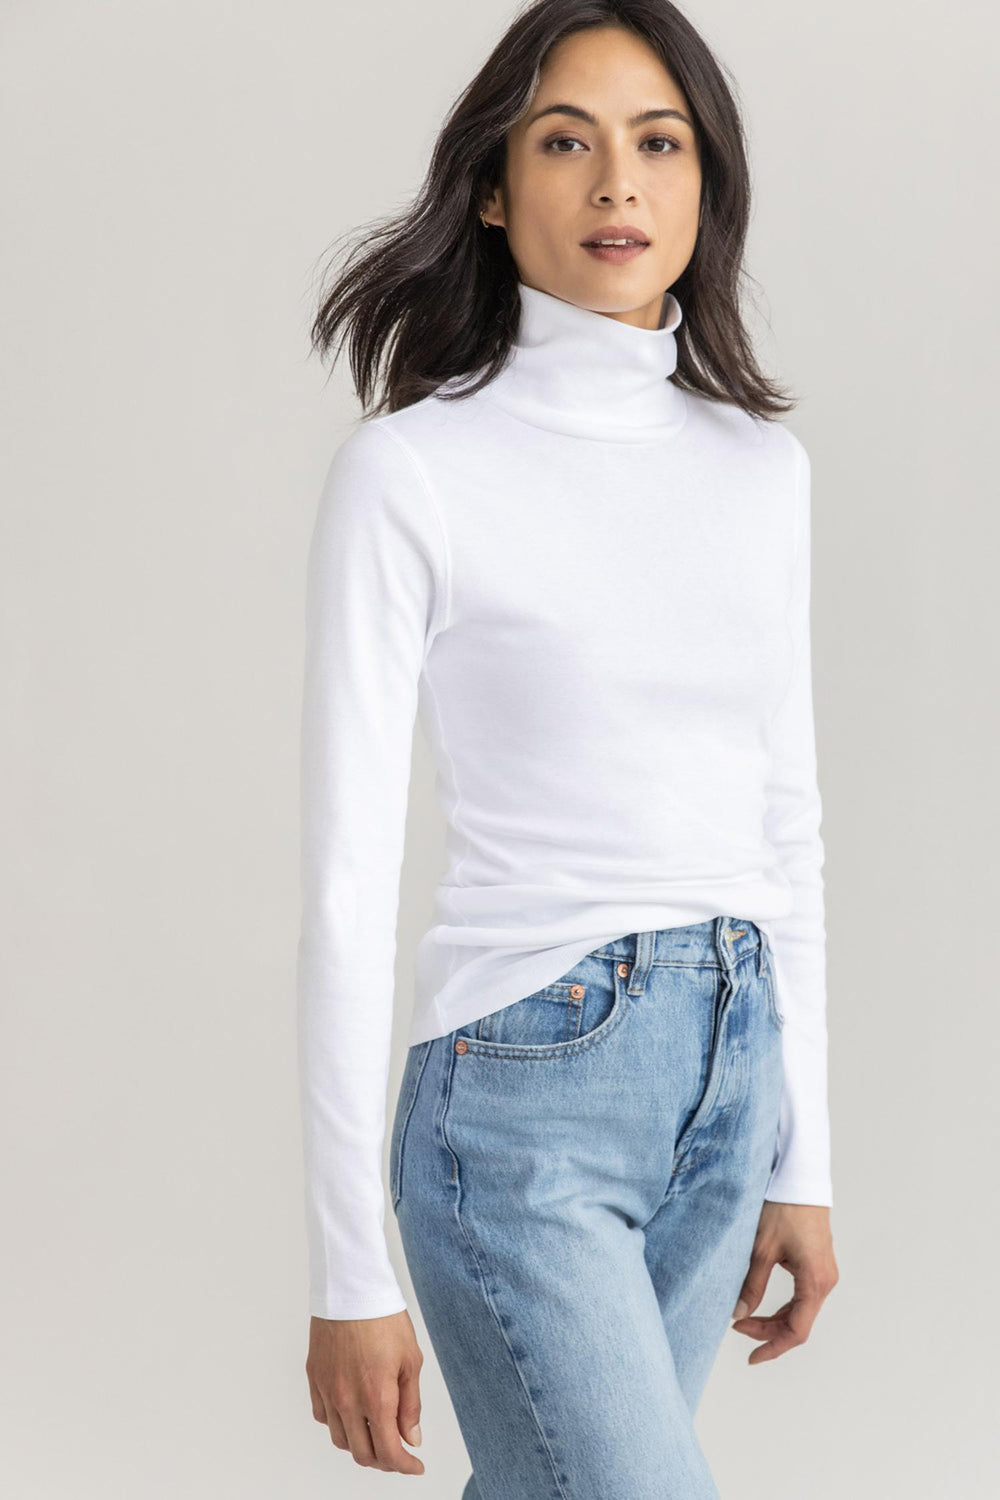 Long Sleeve Turtle Neck Tee in White - Madison&